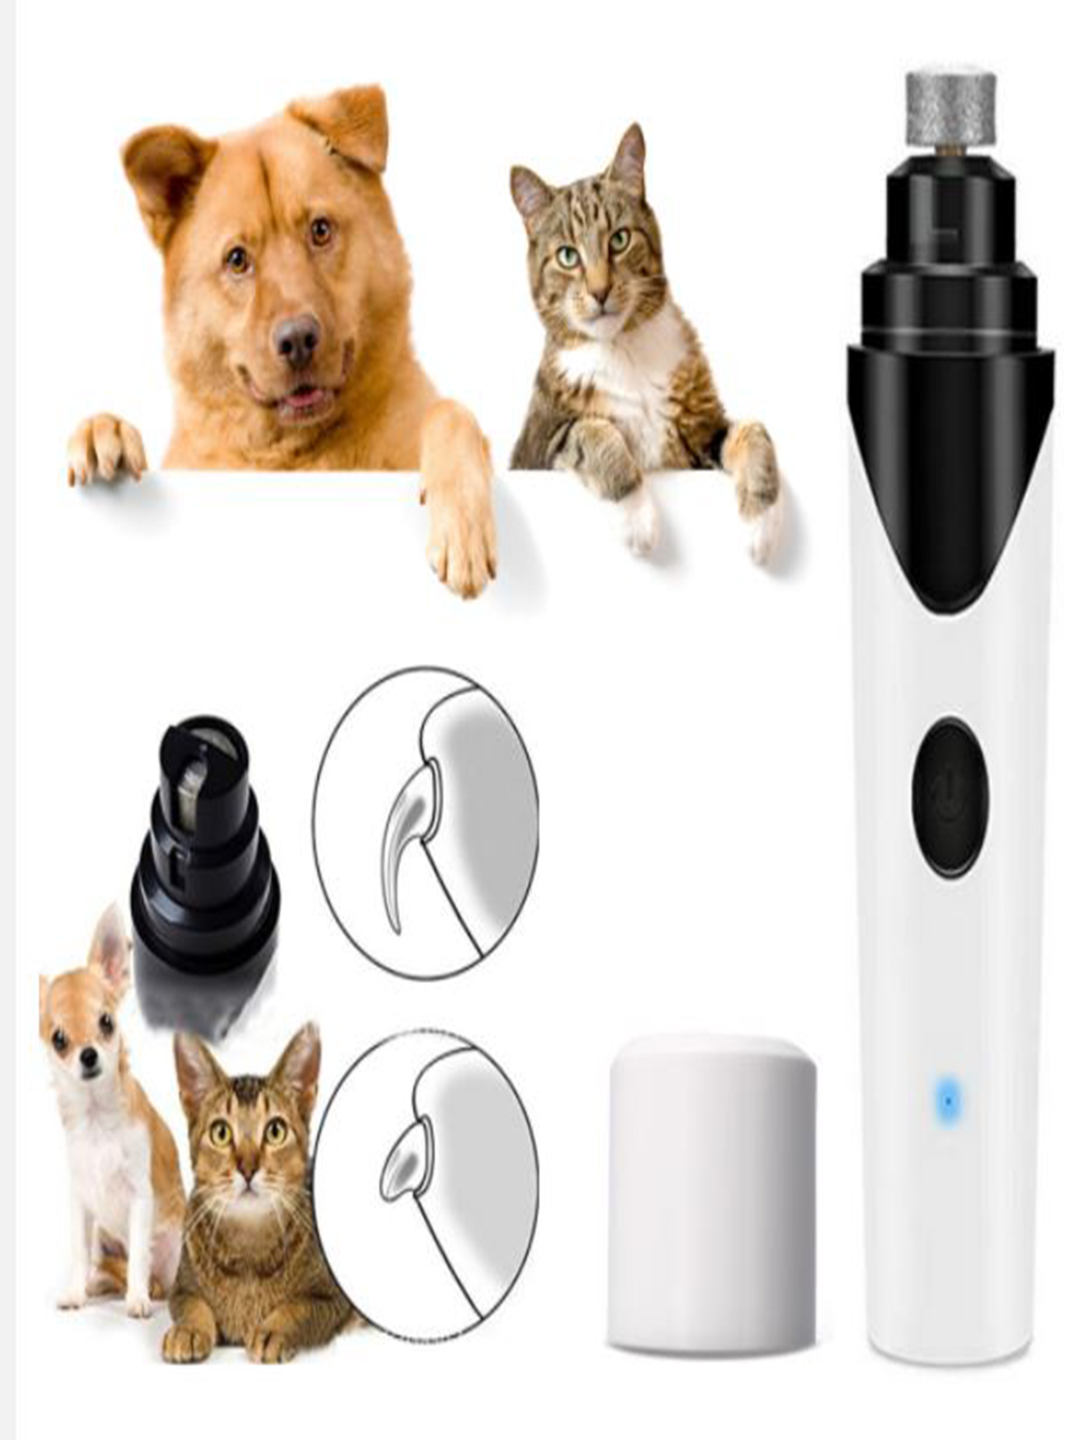 Dogs & Cats Pro Portable Nail Grinder